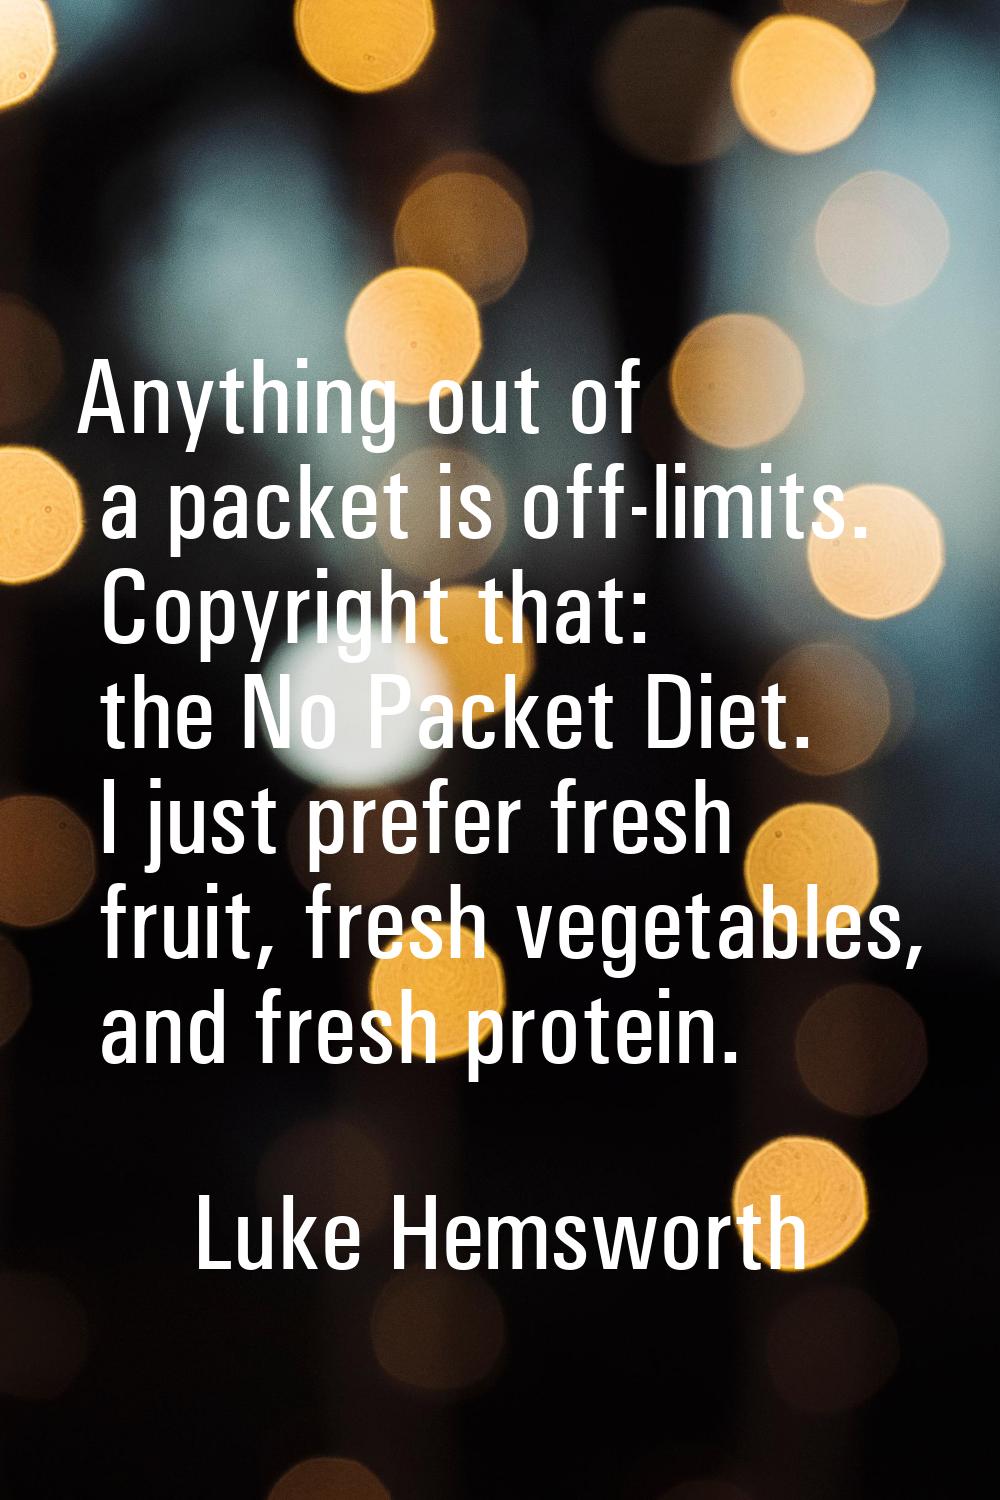 Anything out of a packet is off-limits. Copyright that: the No Packet Diet. I just prefer fresh fru